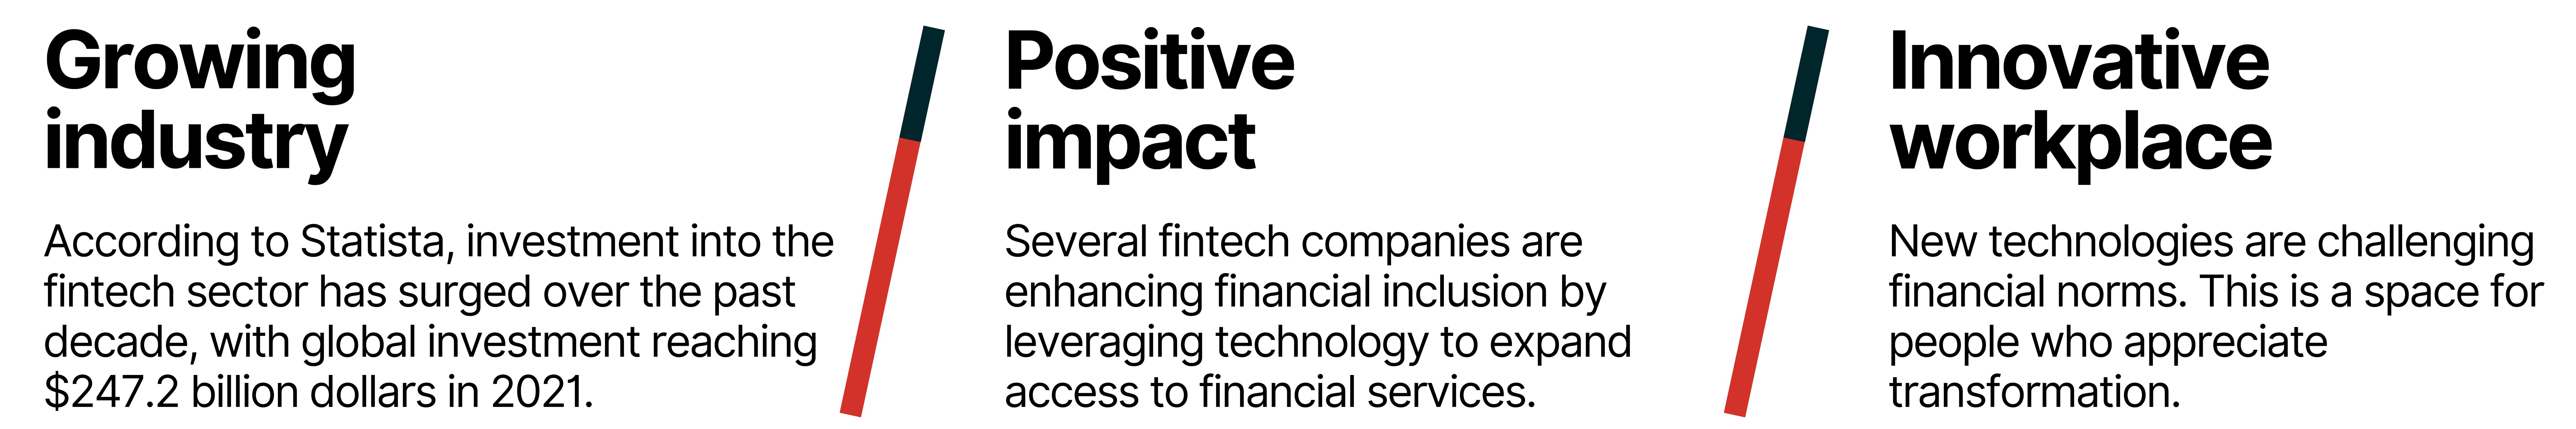 An infographic explains three benefits to developing fintech skills, including access to a growing industry, positive impact opportunities, and innovative workplaces.